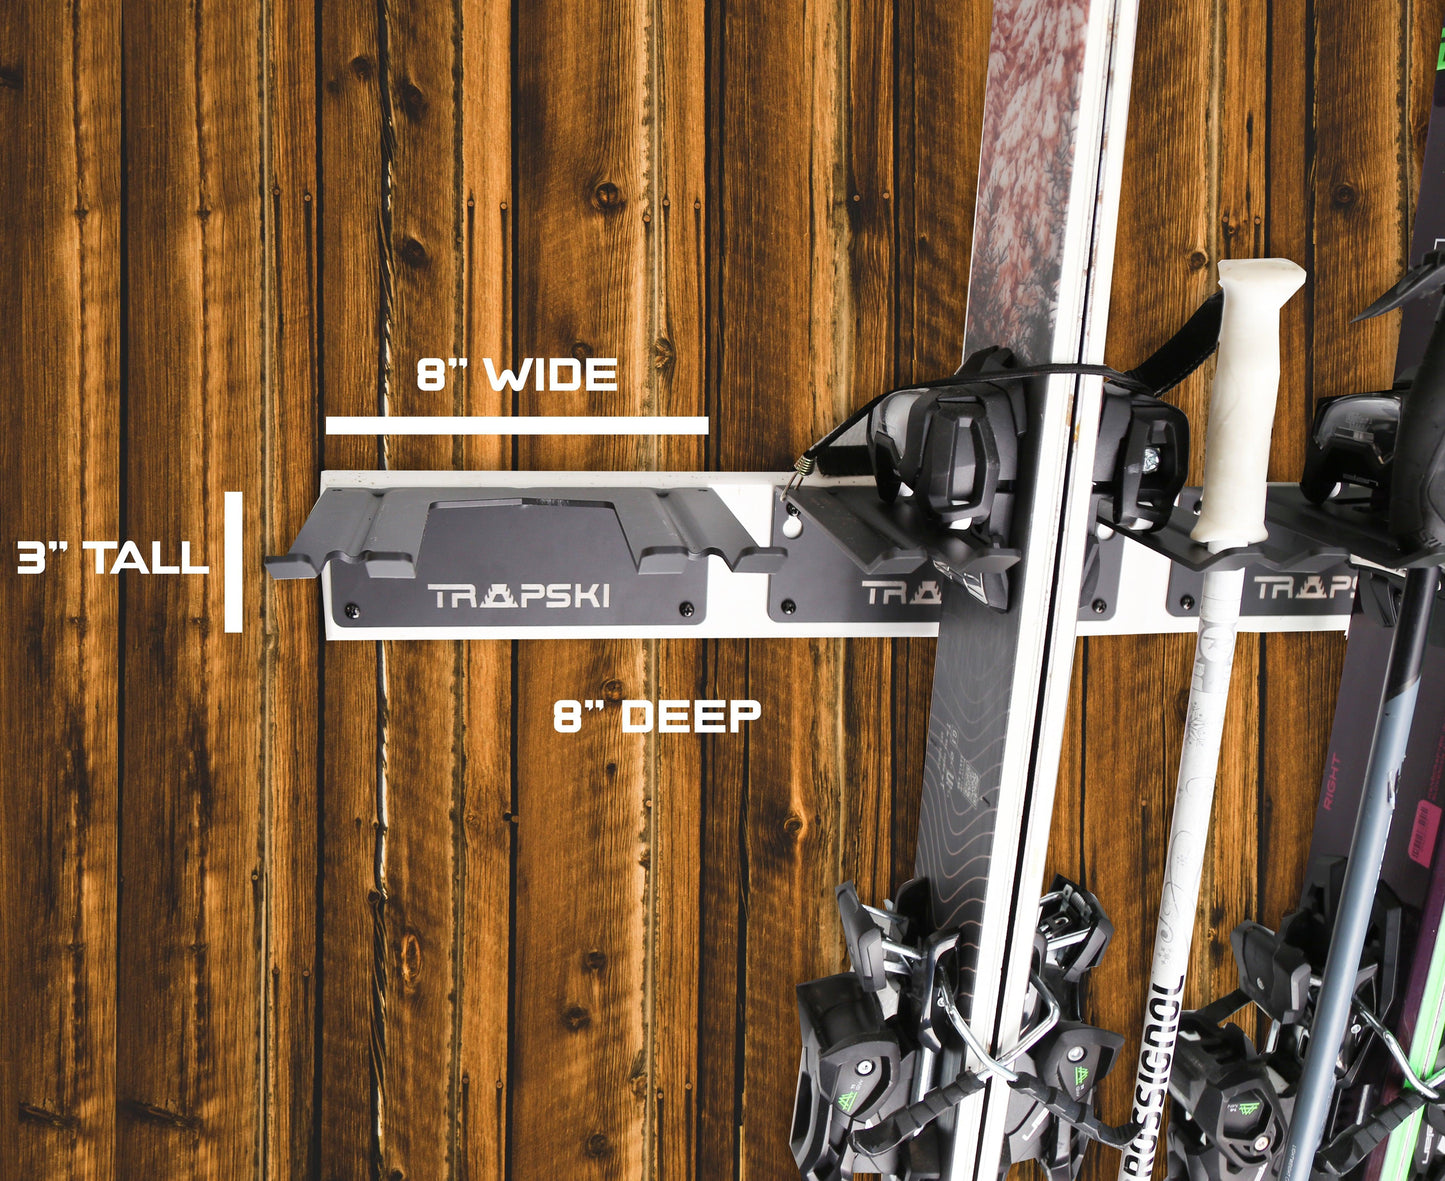 TRAPAWAY Wall Rack  | Garage Organizer for Yard Tools, Gear & Equipment | Holds Skis or Snowboard by Bindings | Aluminum | No Moving Parts to break or pinch | Made in the USA